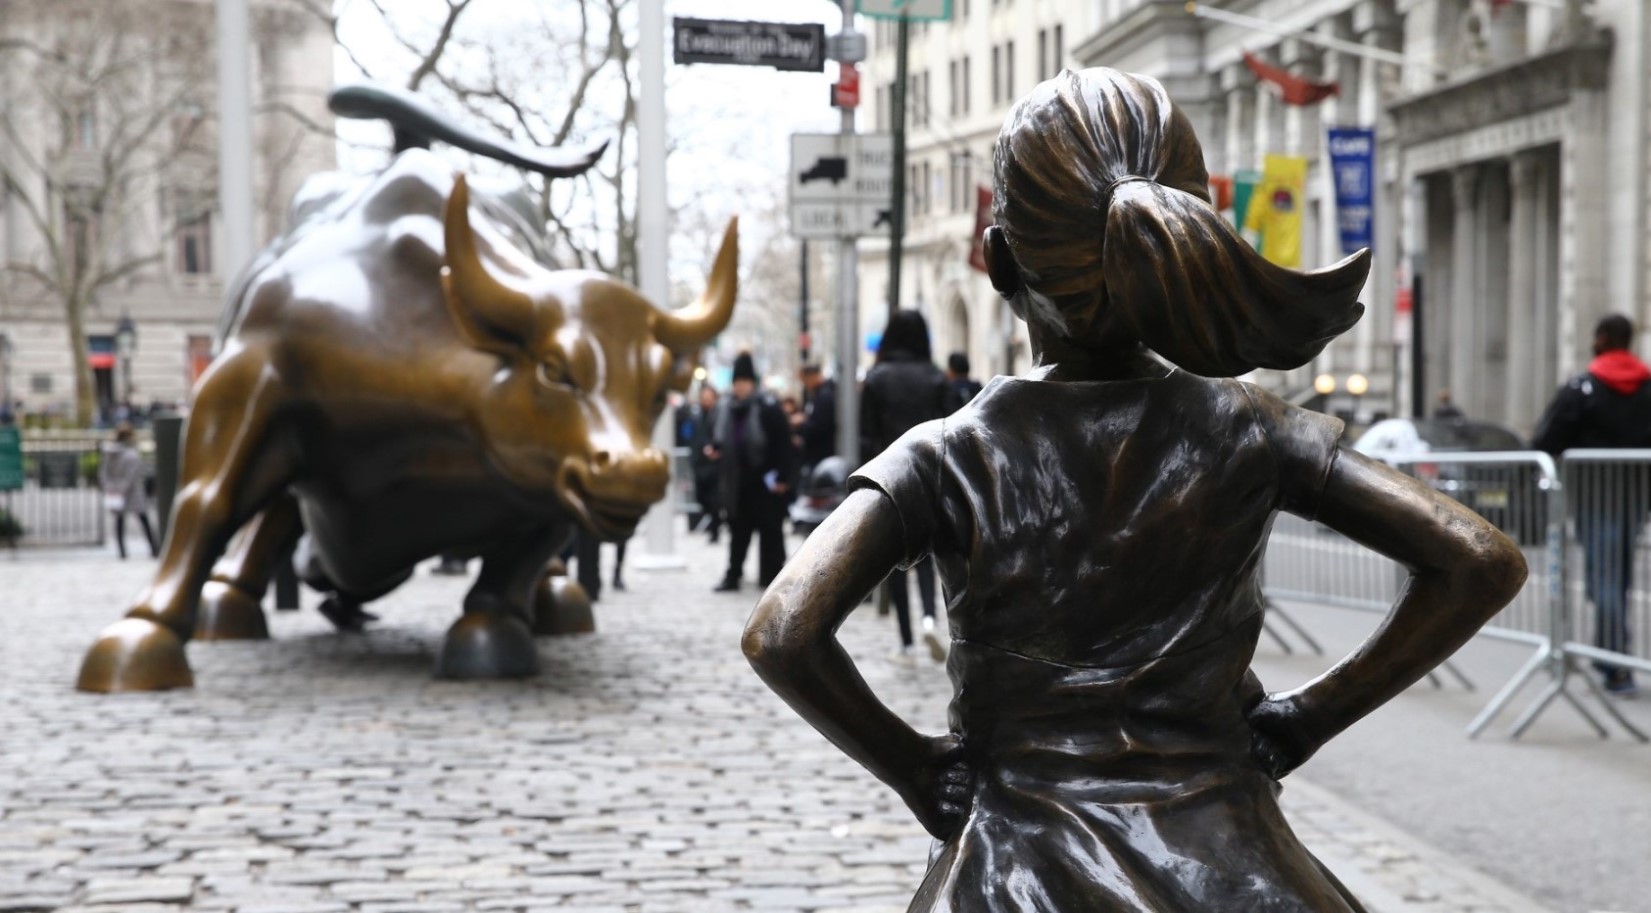 "The fearless girl"